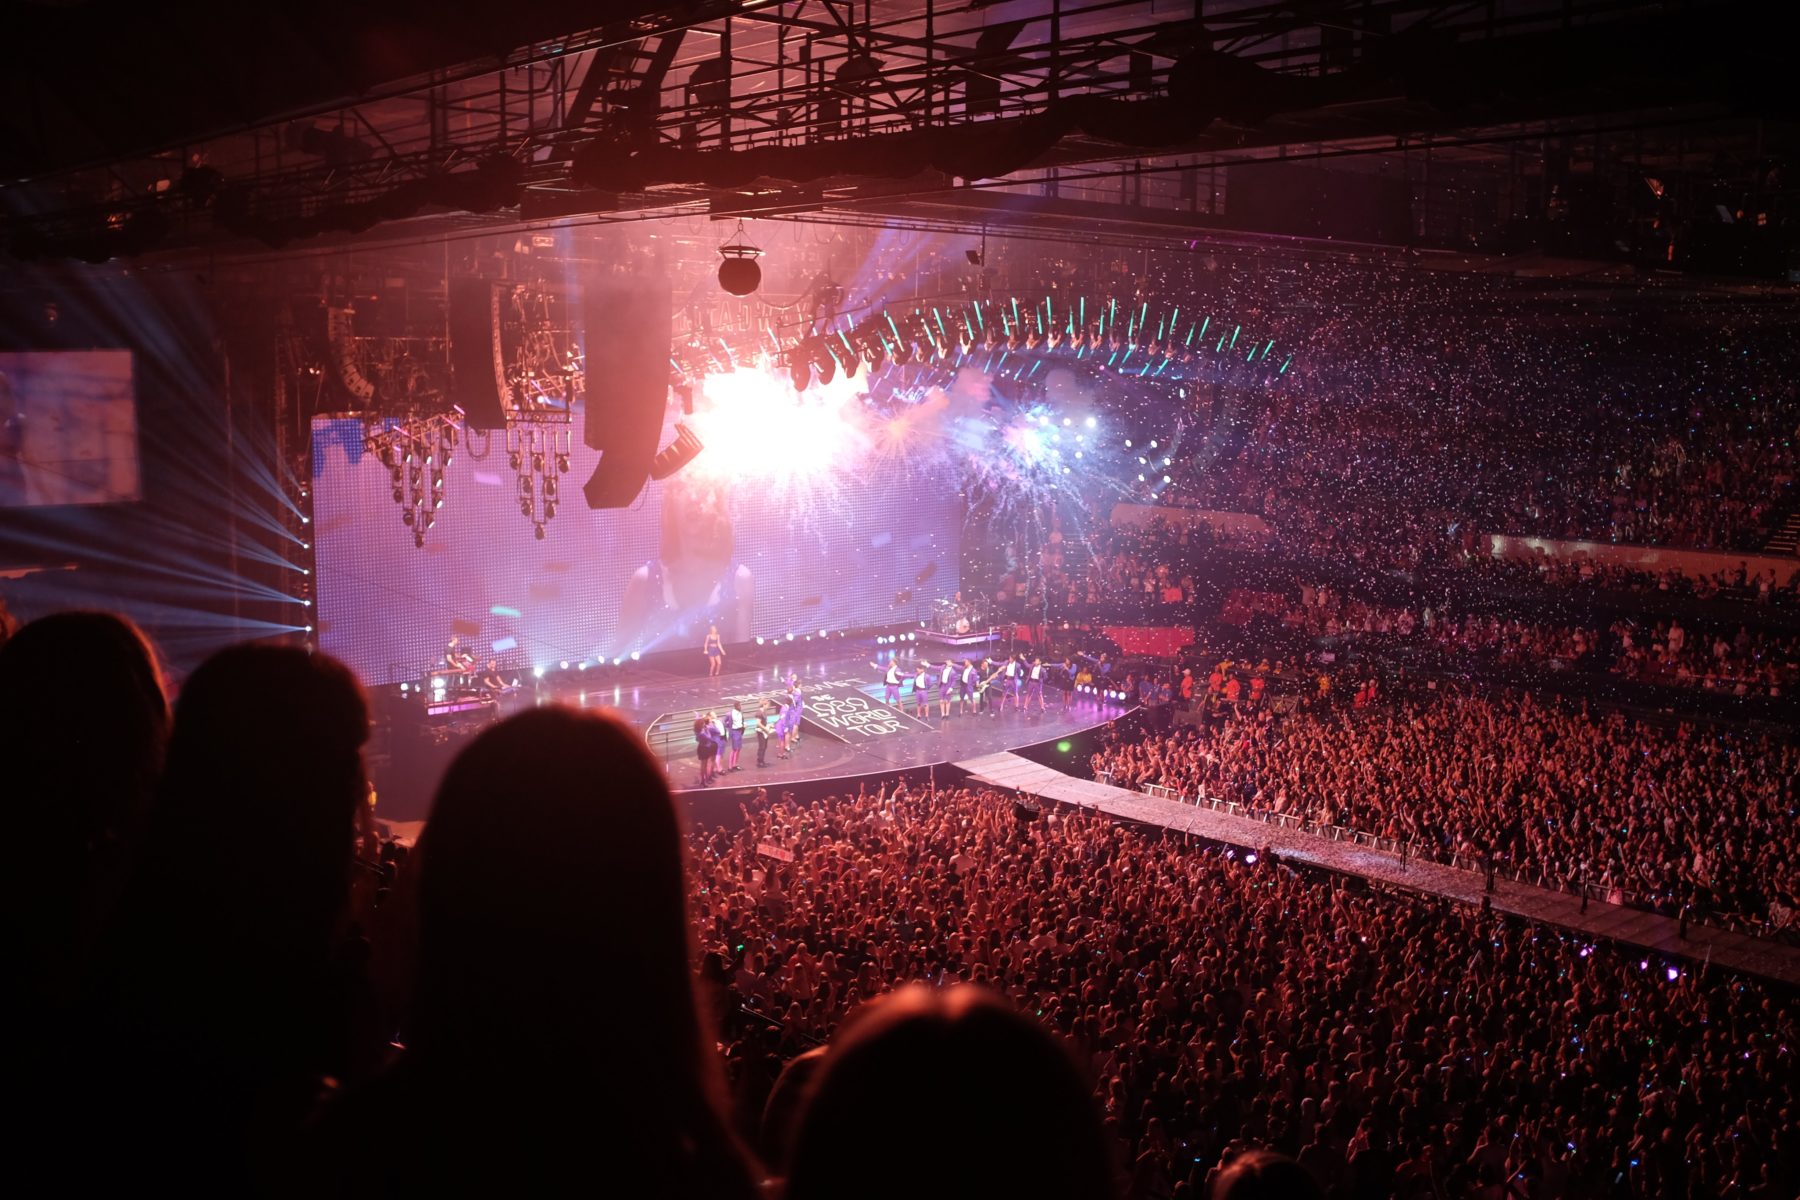 A full stadium in Adelaide for Taylor Swift's 1989 World Tour performance.